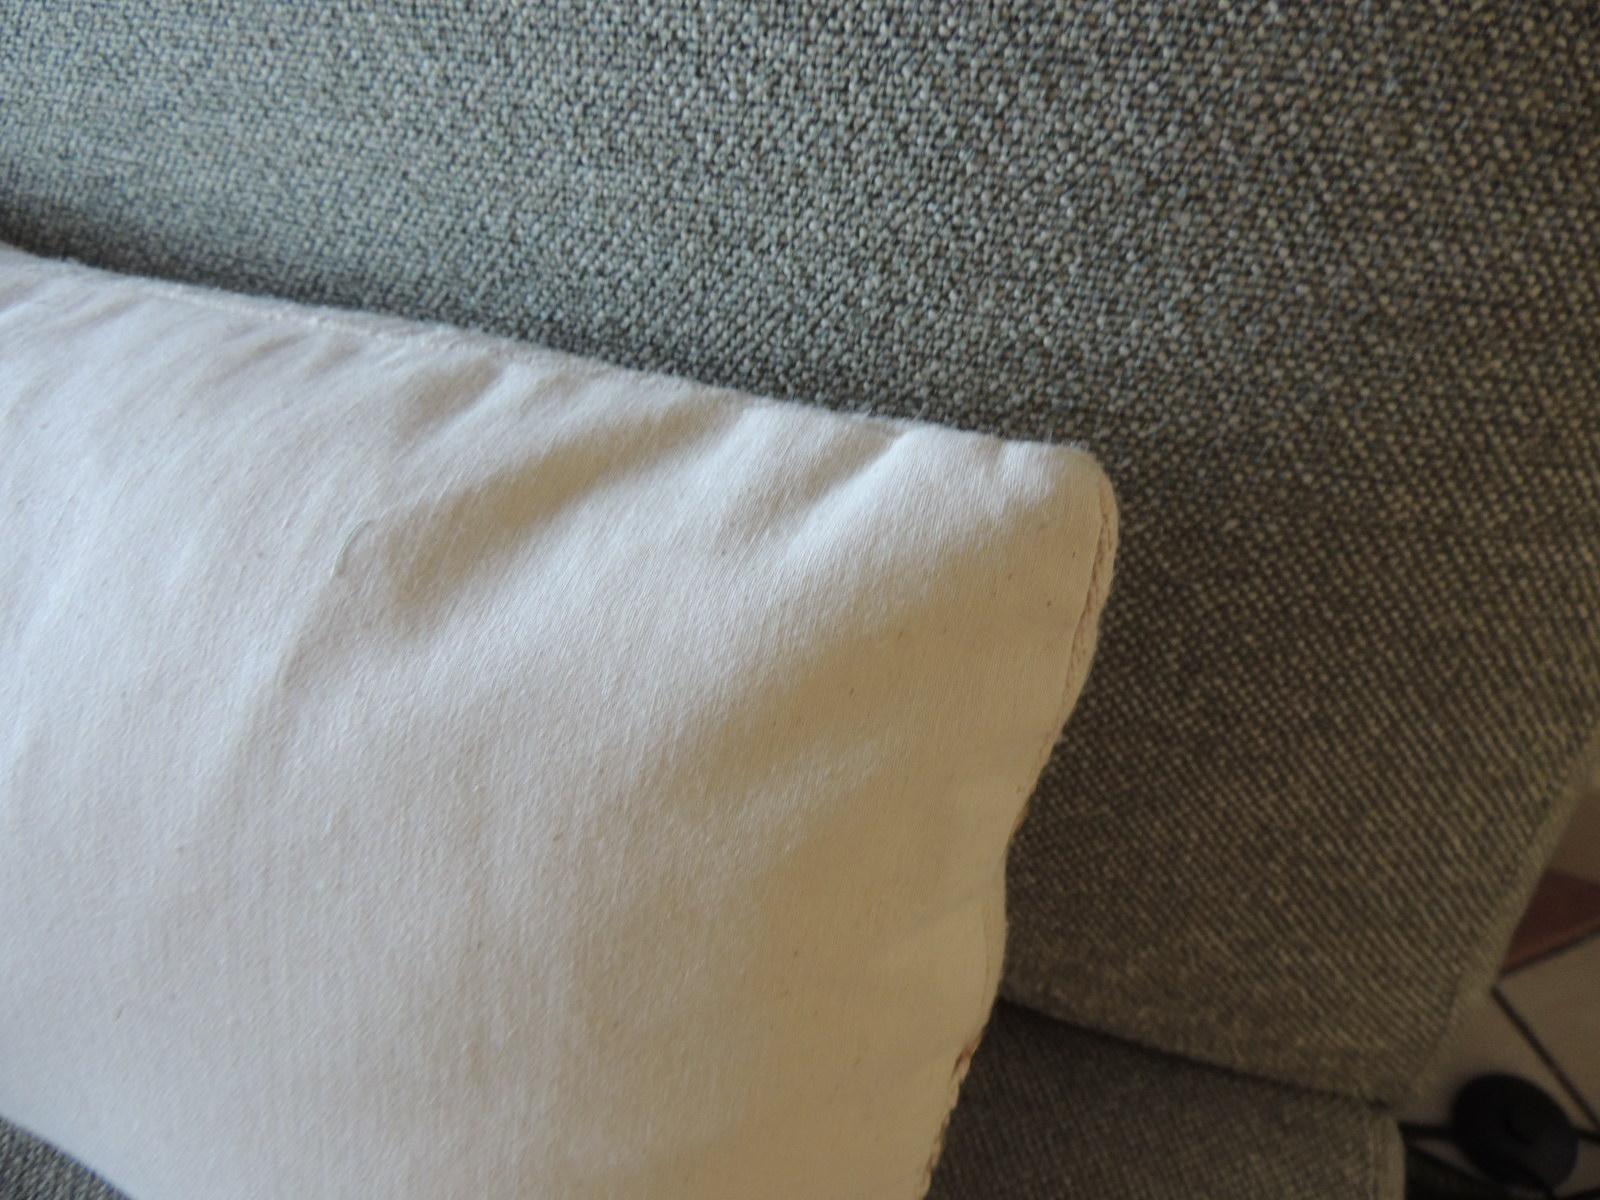 Hand-Crafted Antique Linen Decorative Bolster Pillow with Vintage Woven Jute Trim